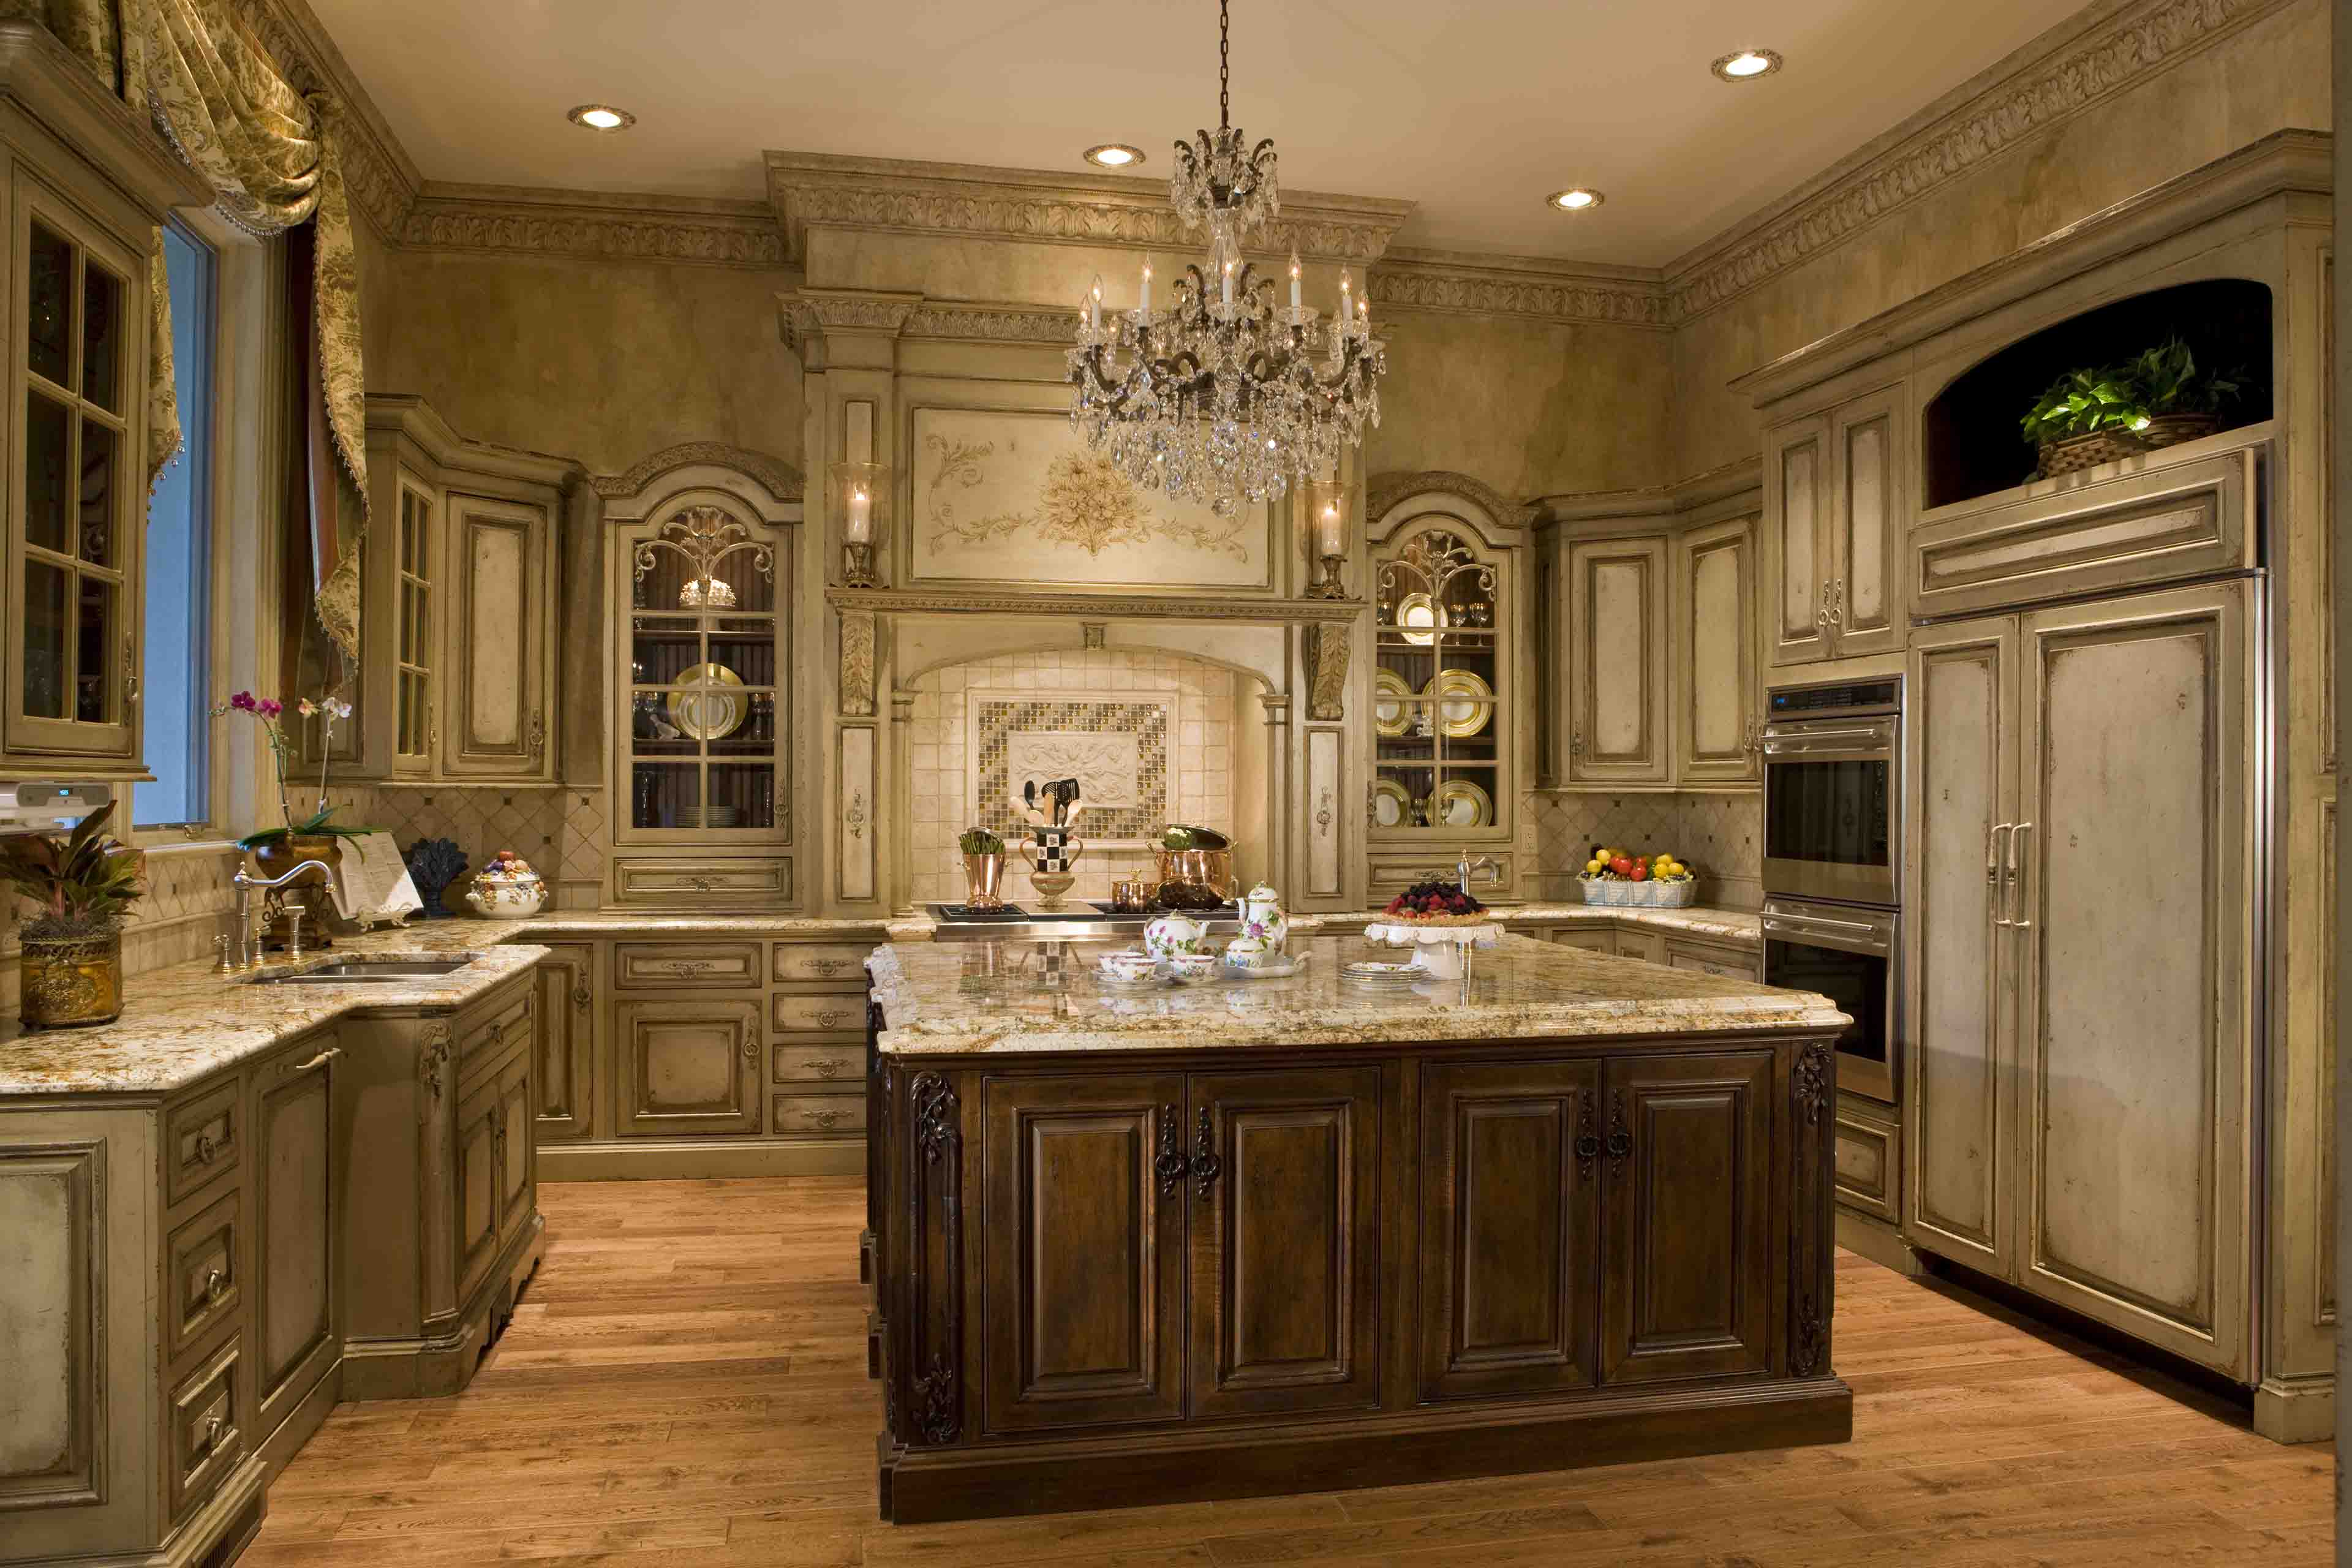 Antique Luxury, custom, gourmet kitchen with large island in neutral colors and crystal chandelier